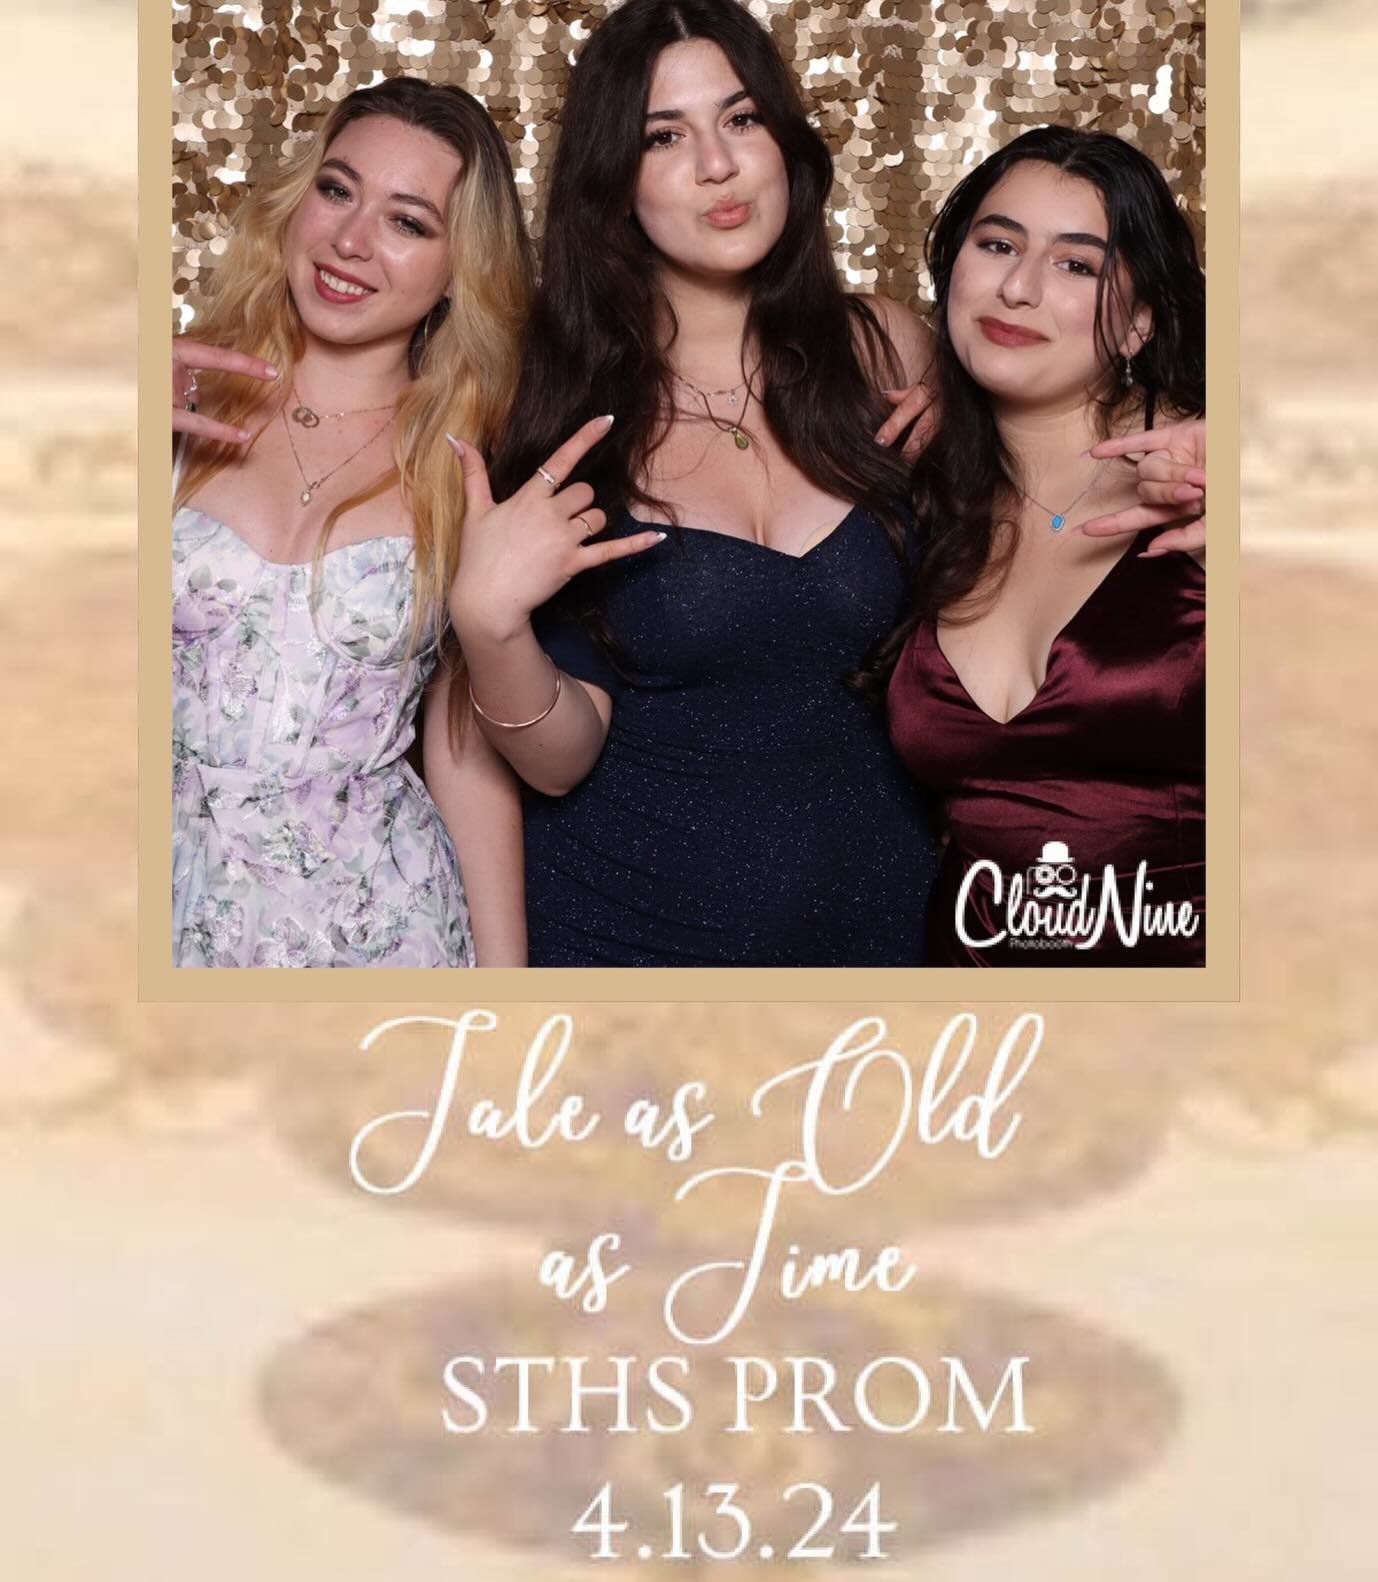 #yes we celebrated #prom last night with @cloudninephotobooth #highschool